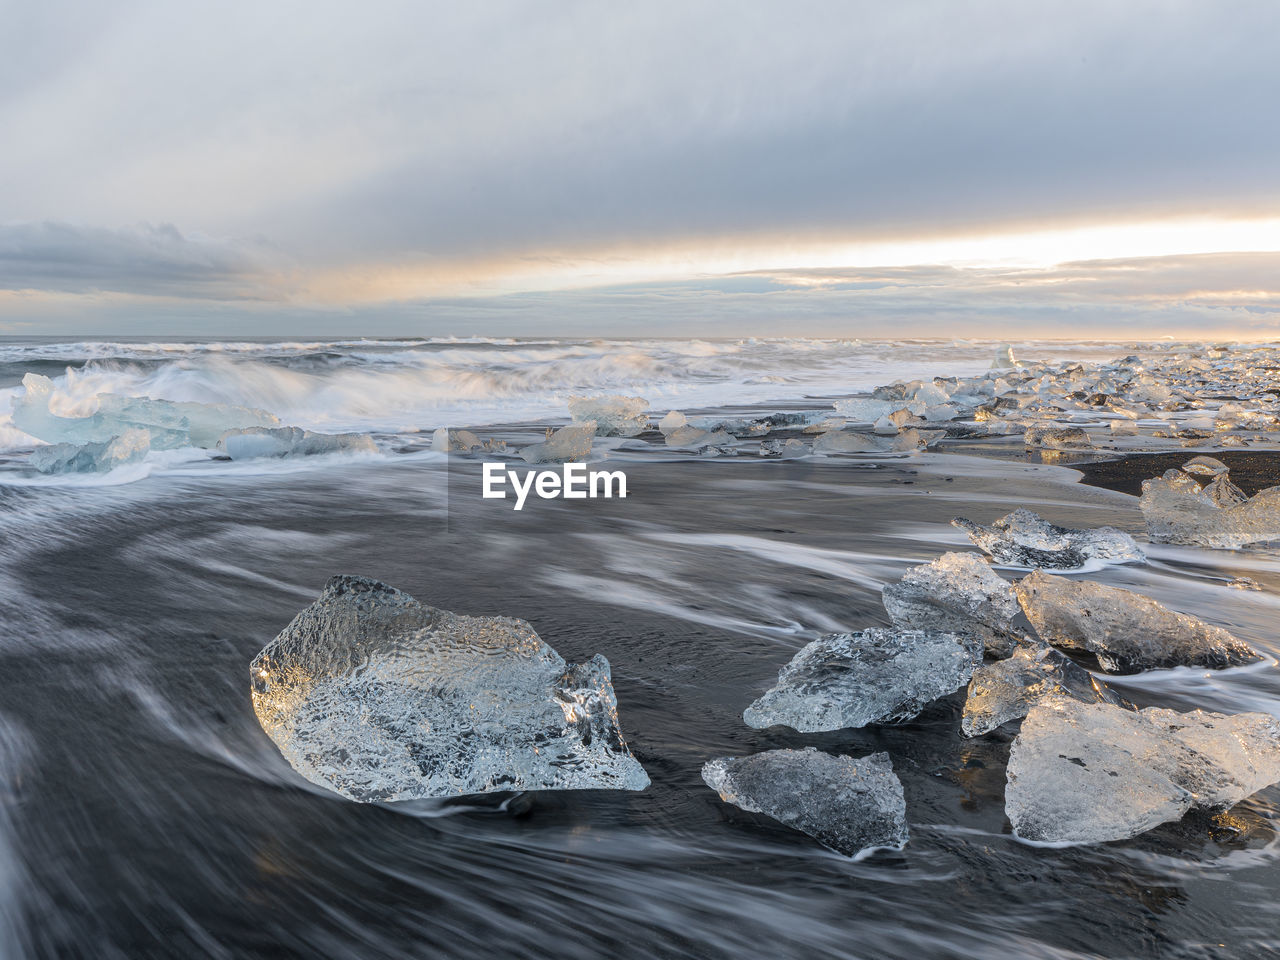 Long exposition of diamond beach, iceland, at sunset, with waves and ice formations